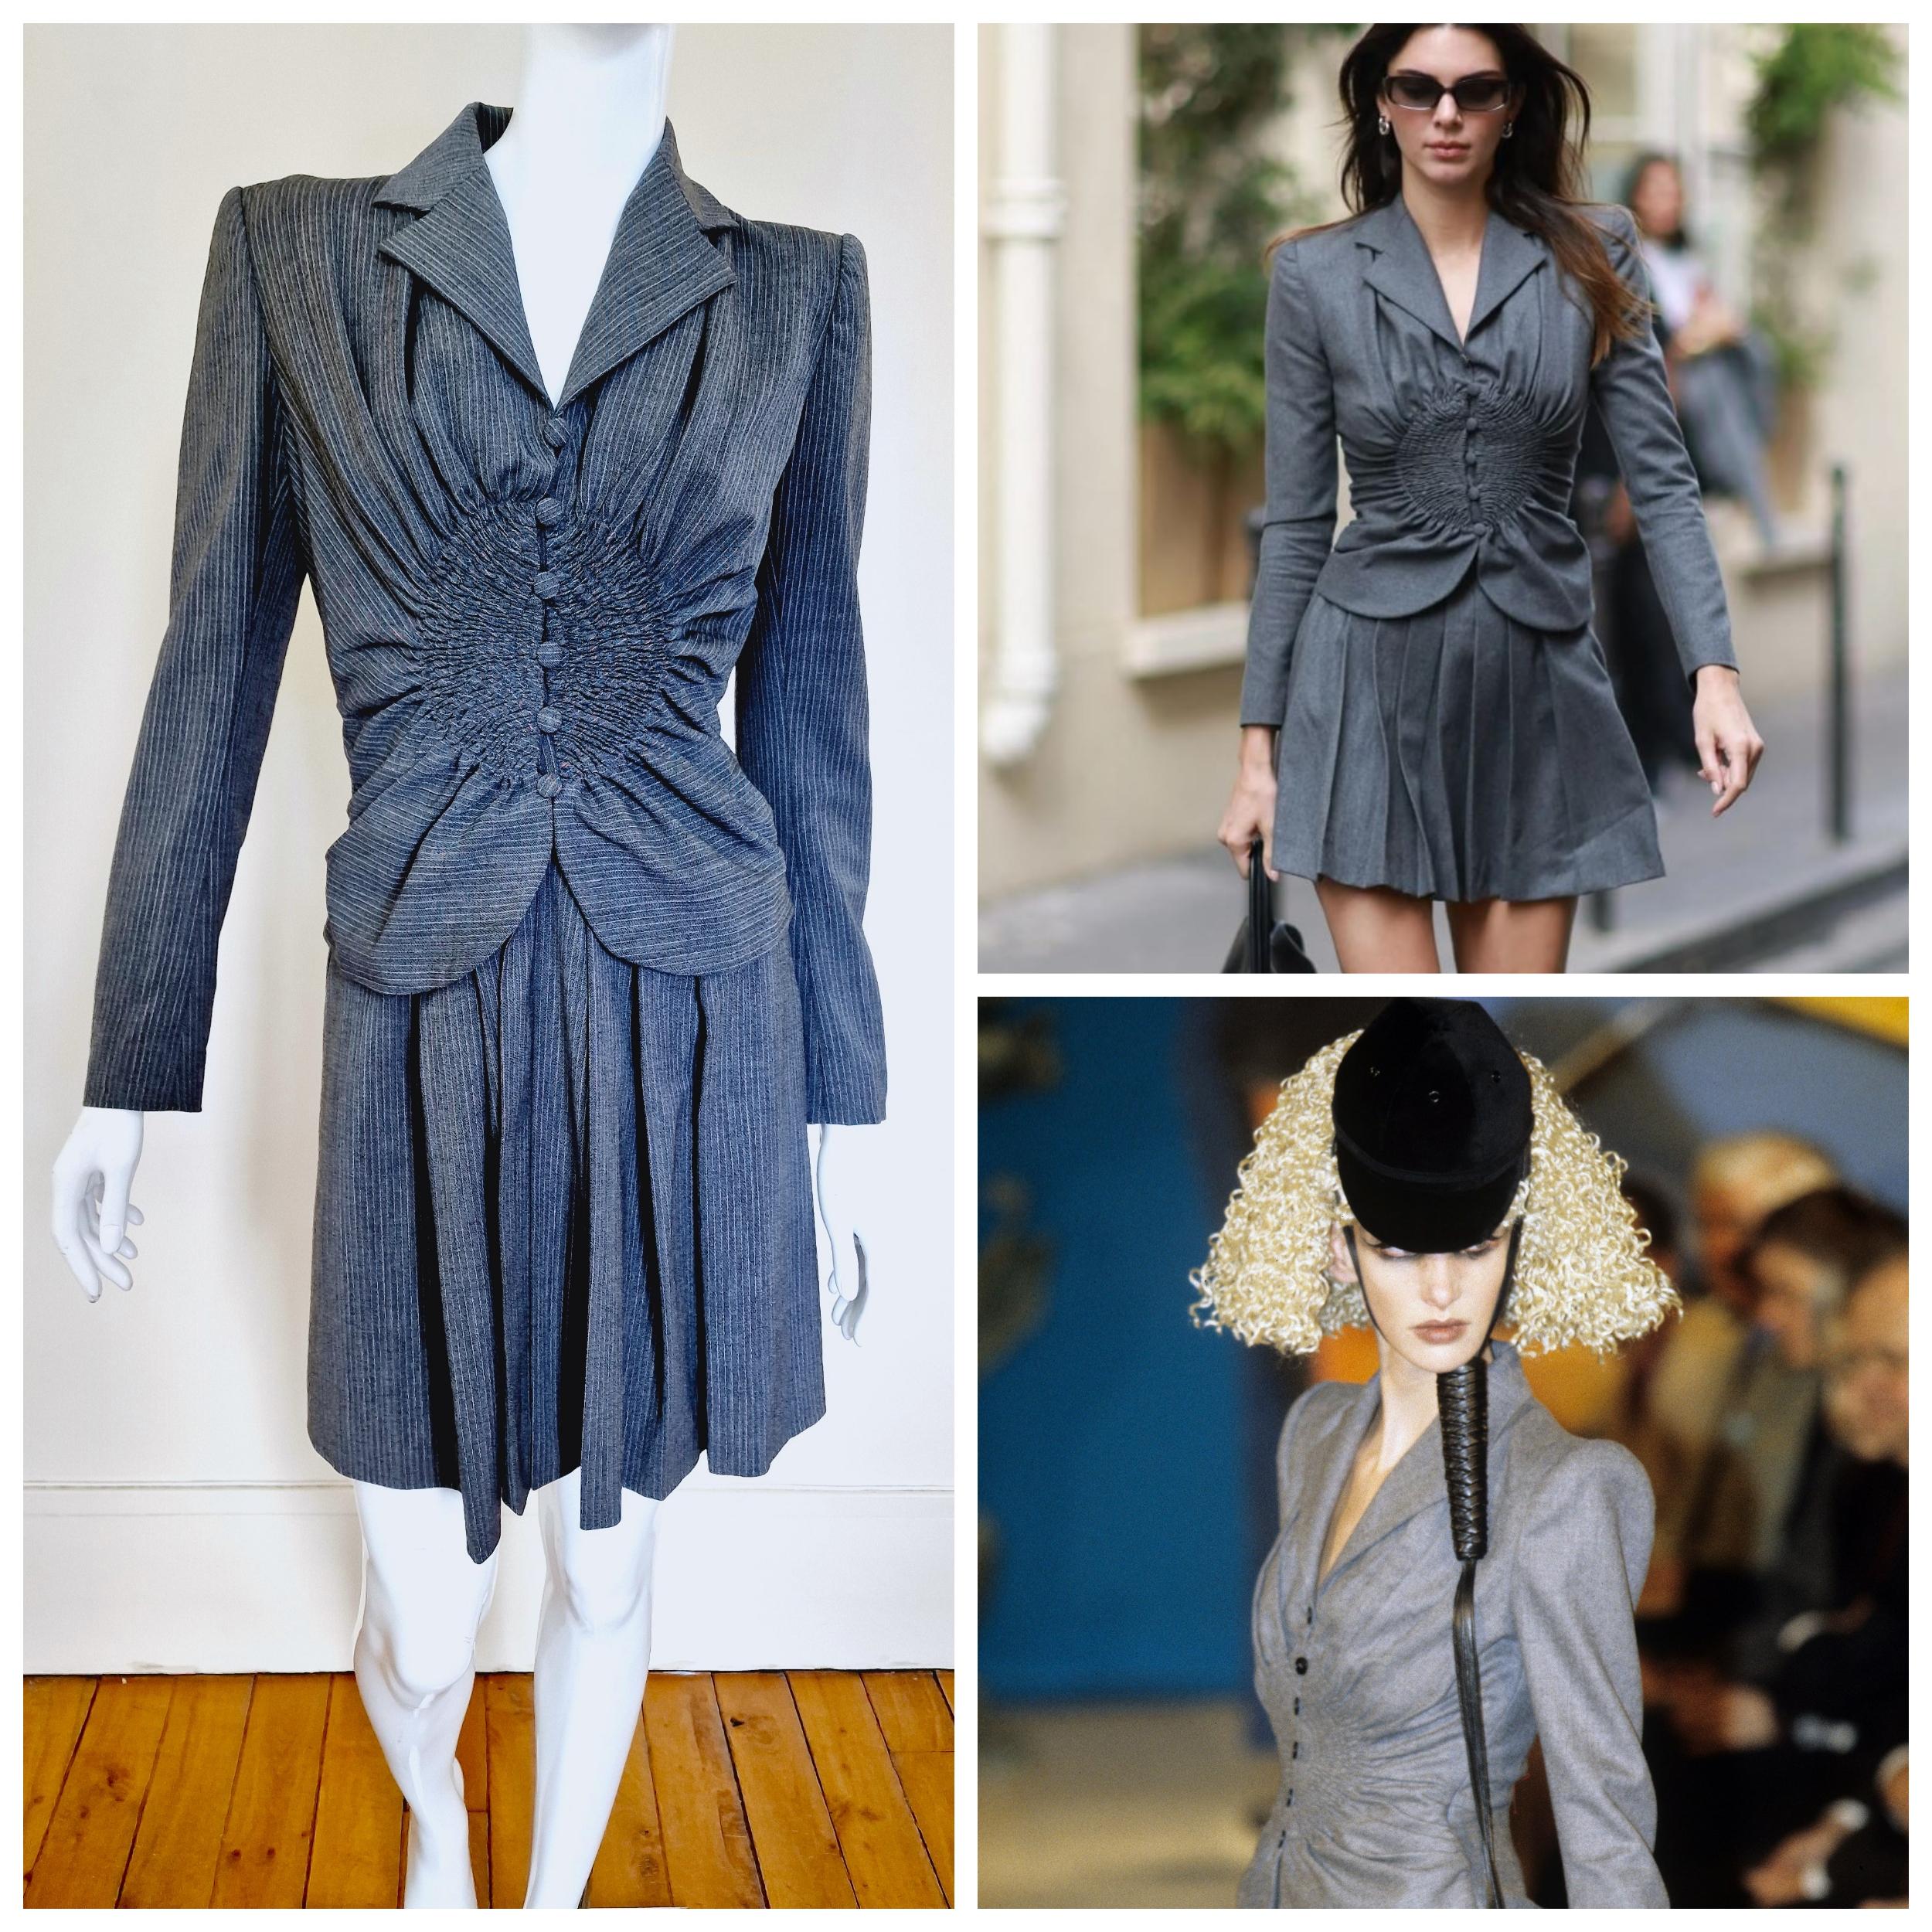 Women's John Galliano Runway 1997 A/W Suzy Phinix Ruched Gray Kendall Jenner Suit Dress